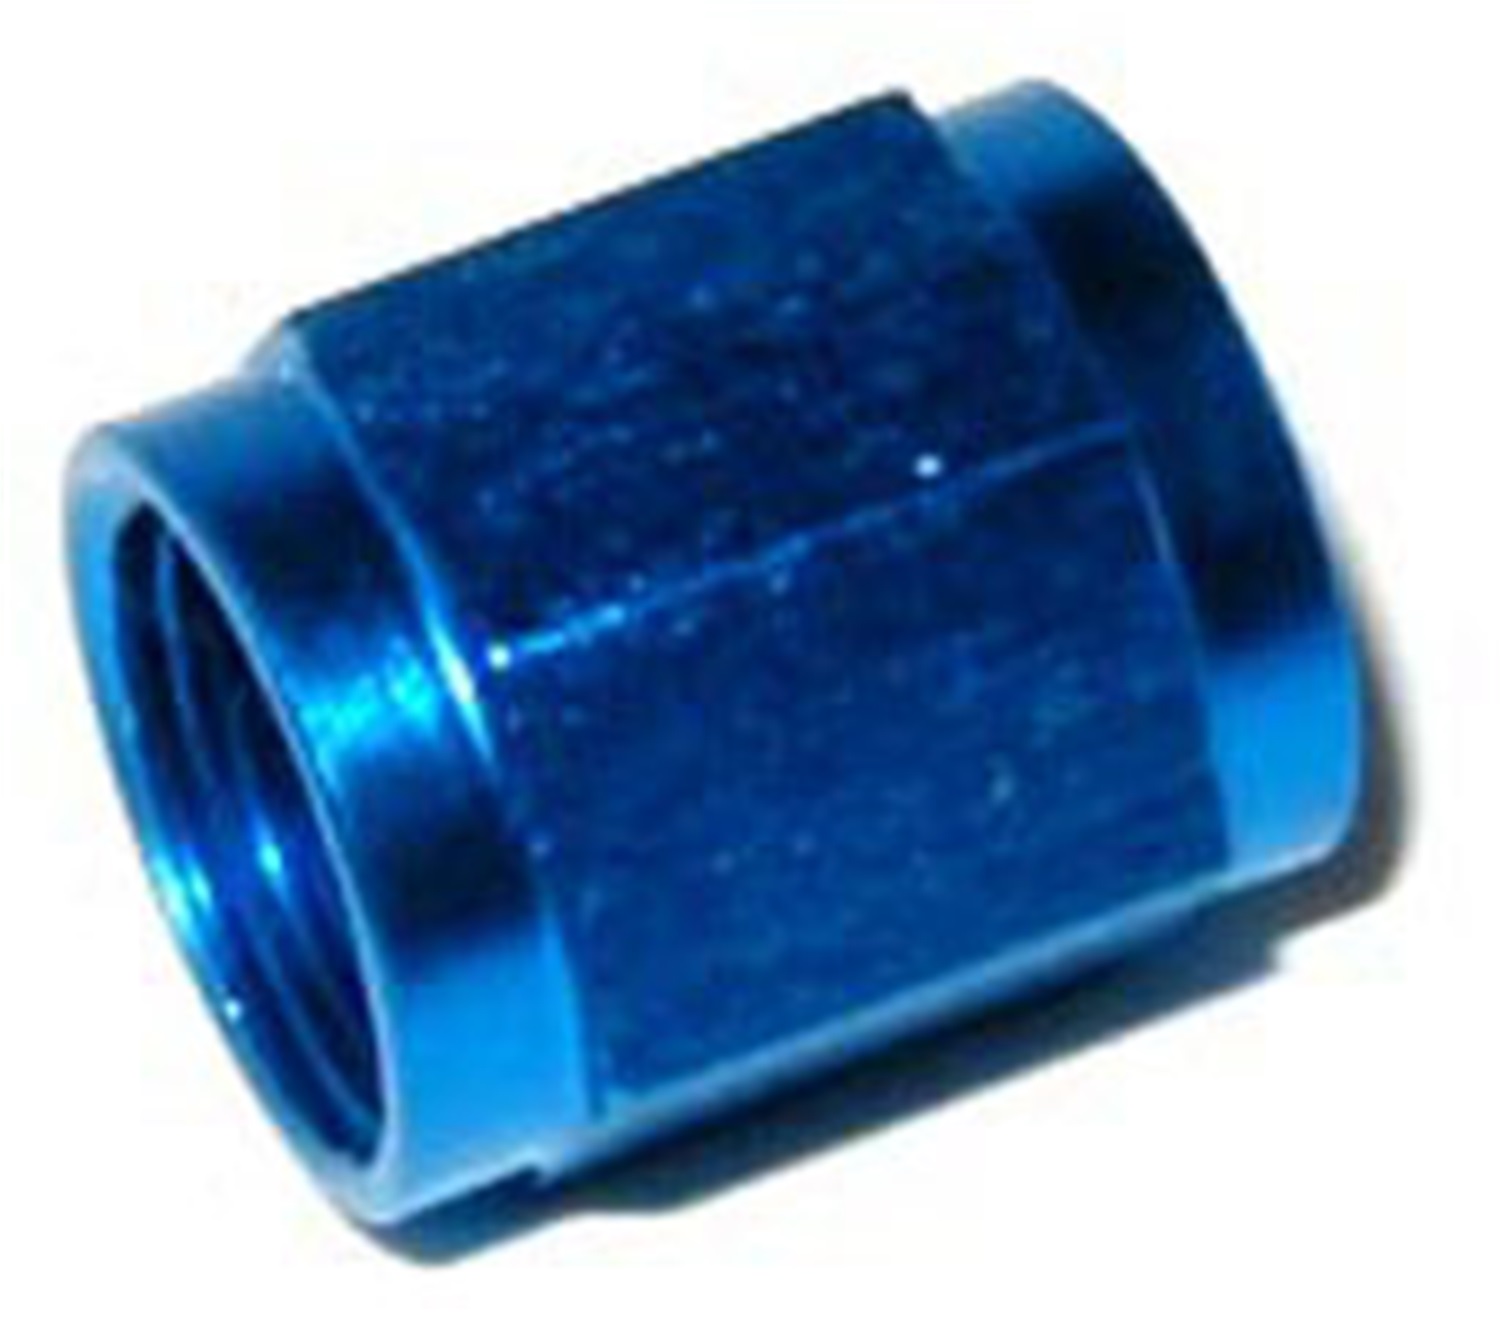 Fuel Hose Fitting, NOS Fittings NOS, 3AN X 1/8in. TUBE NUT BLUE